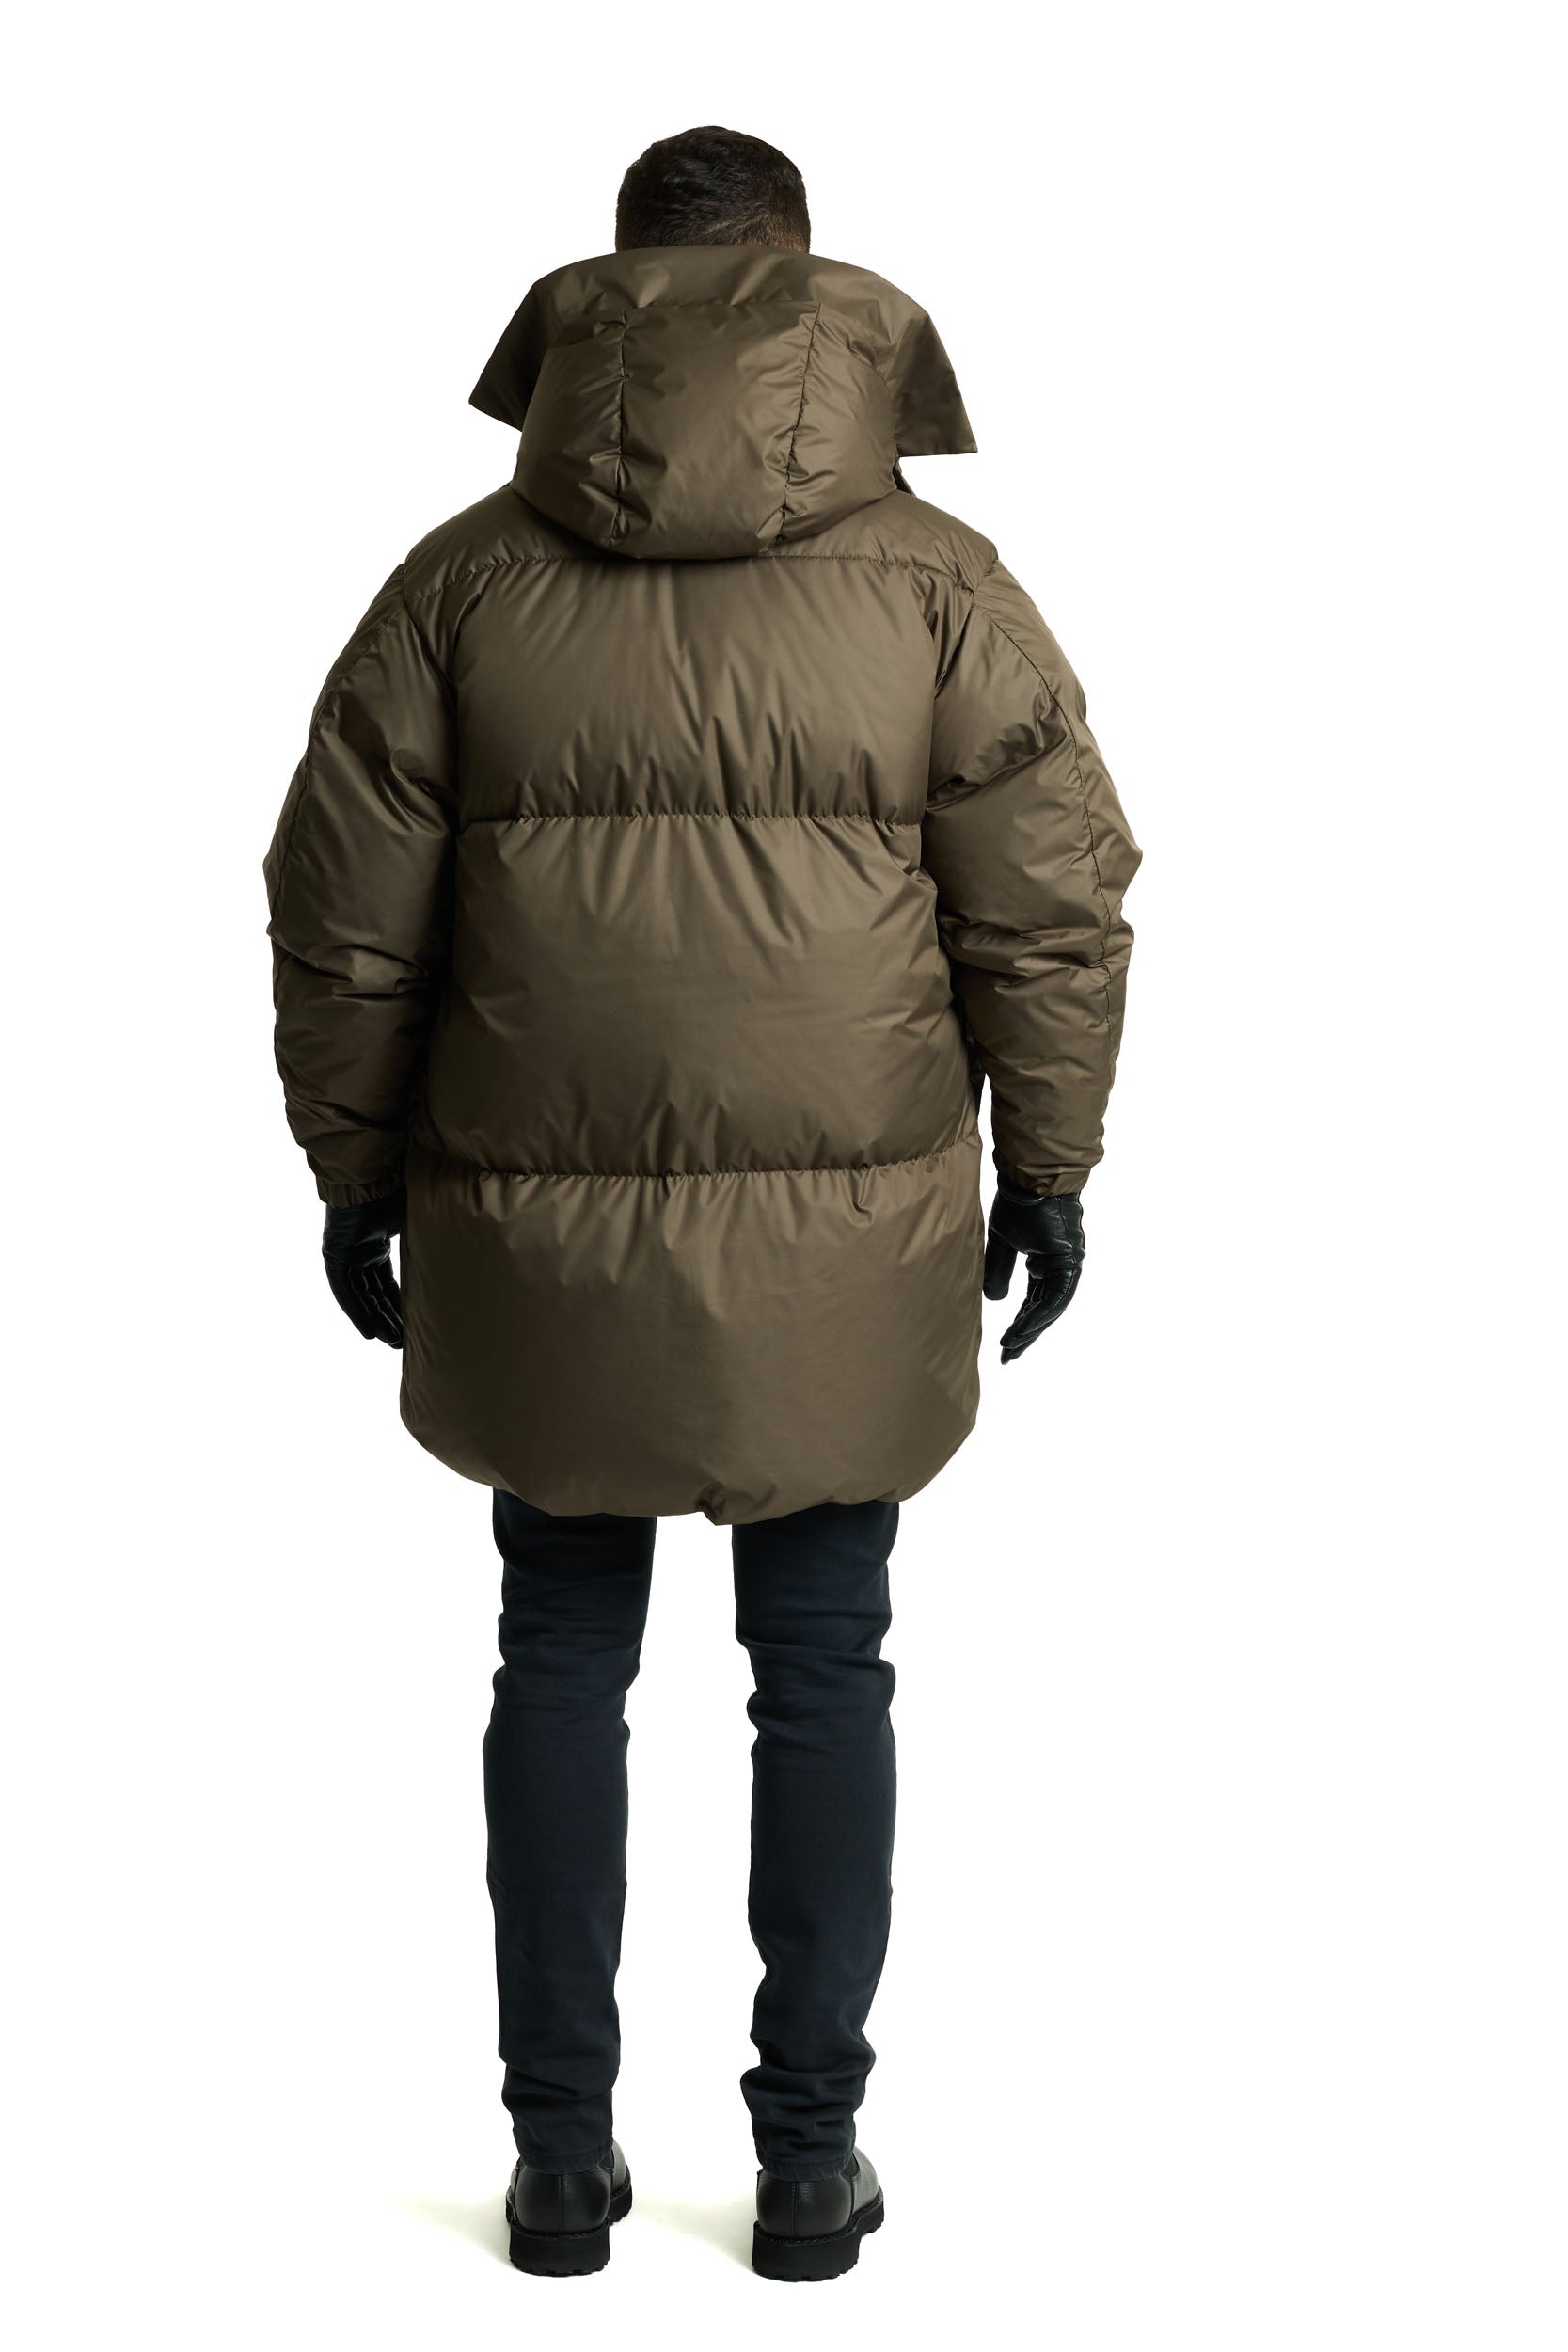 The Cocoon – Olmsted Outerwear